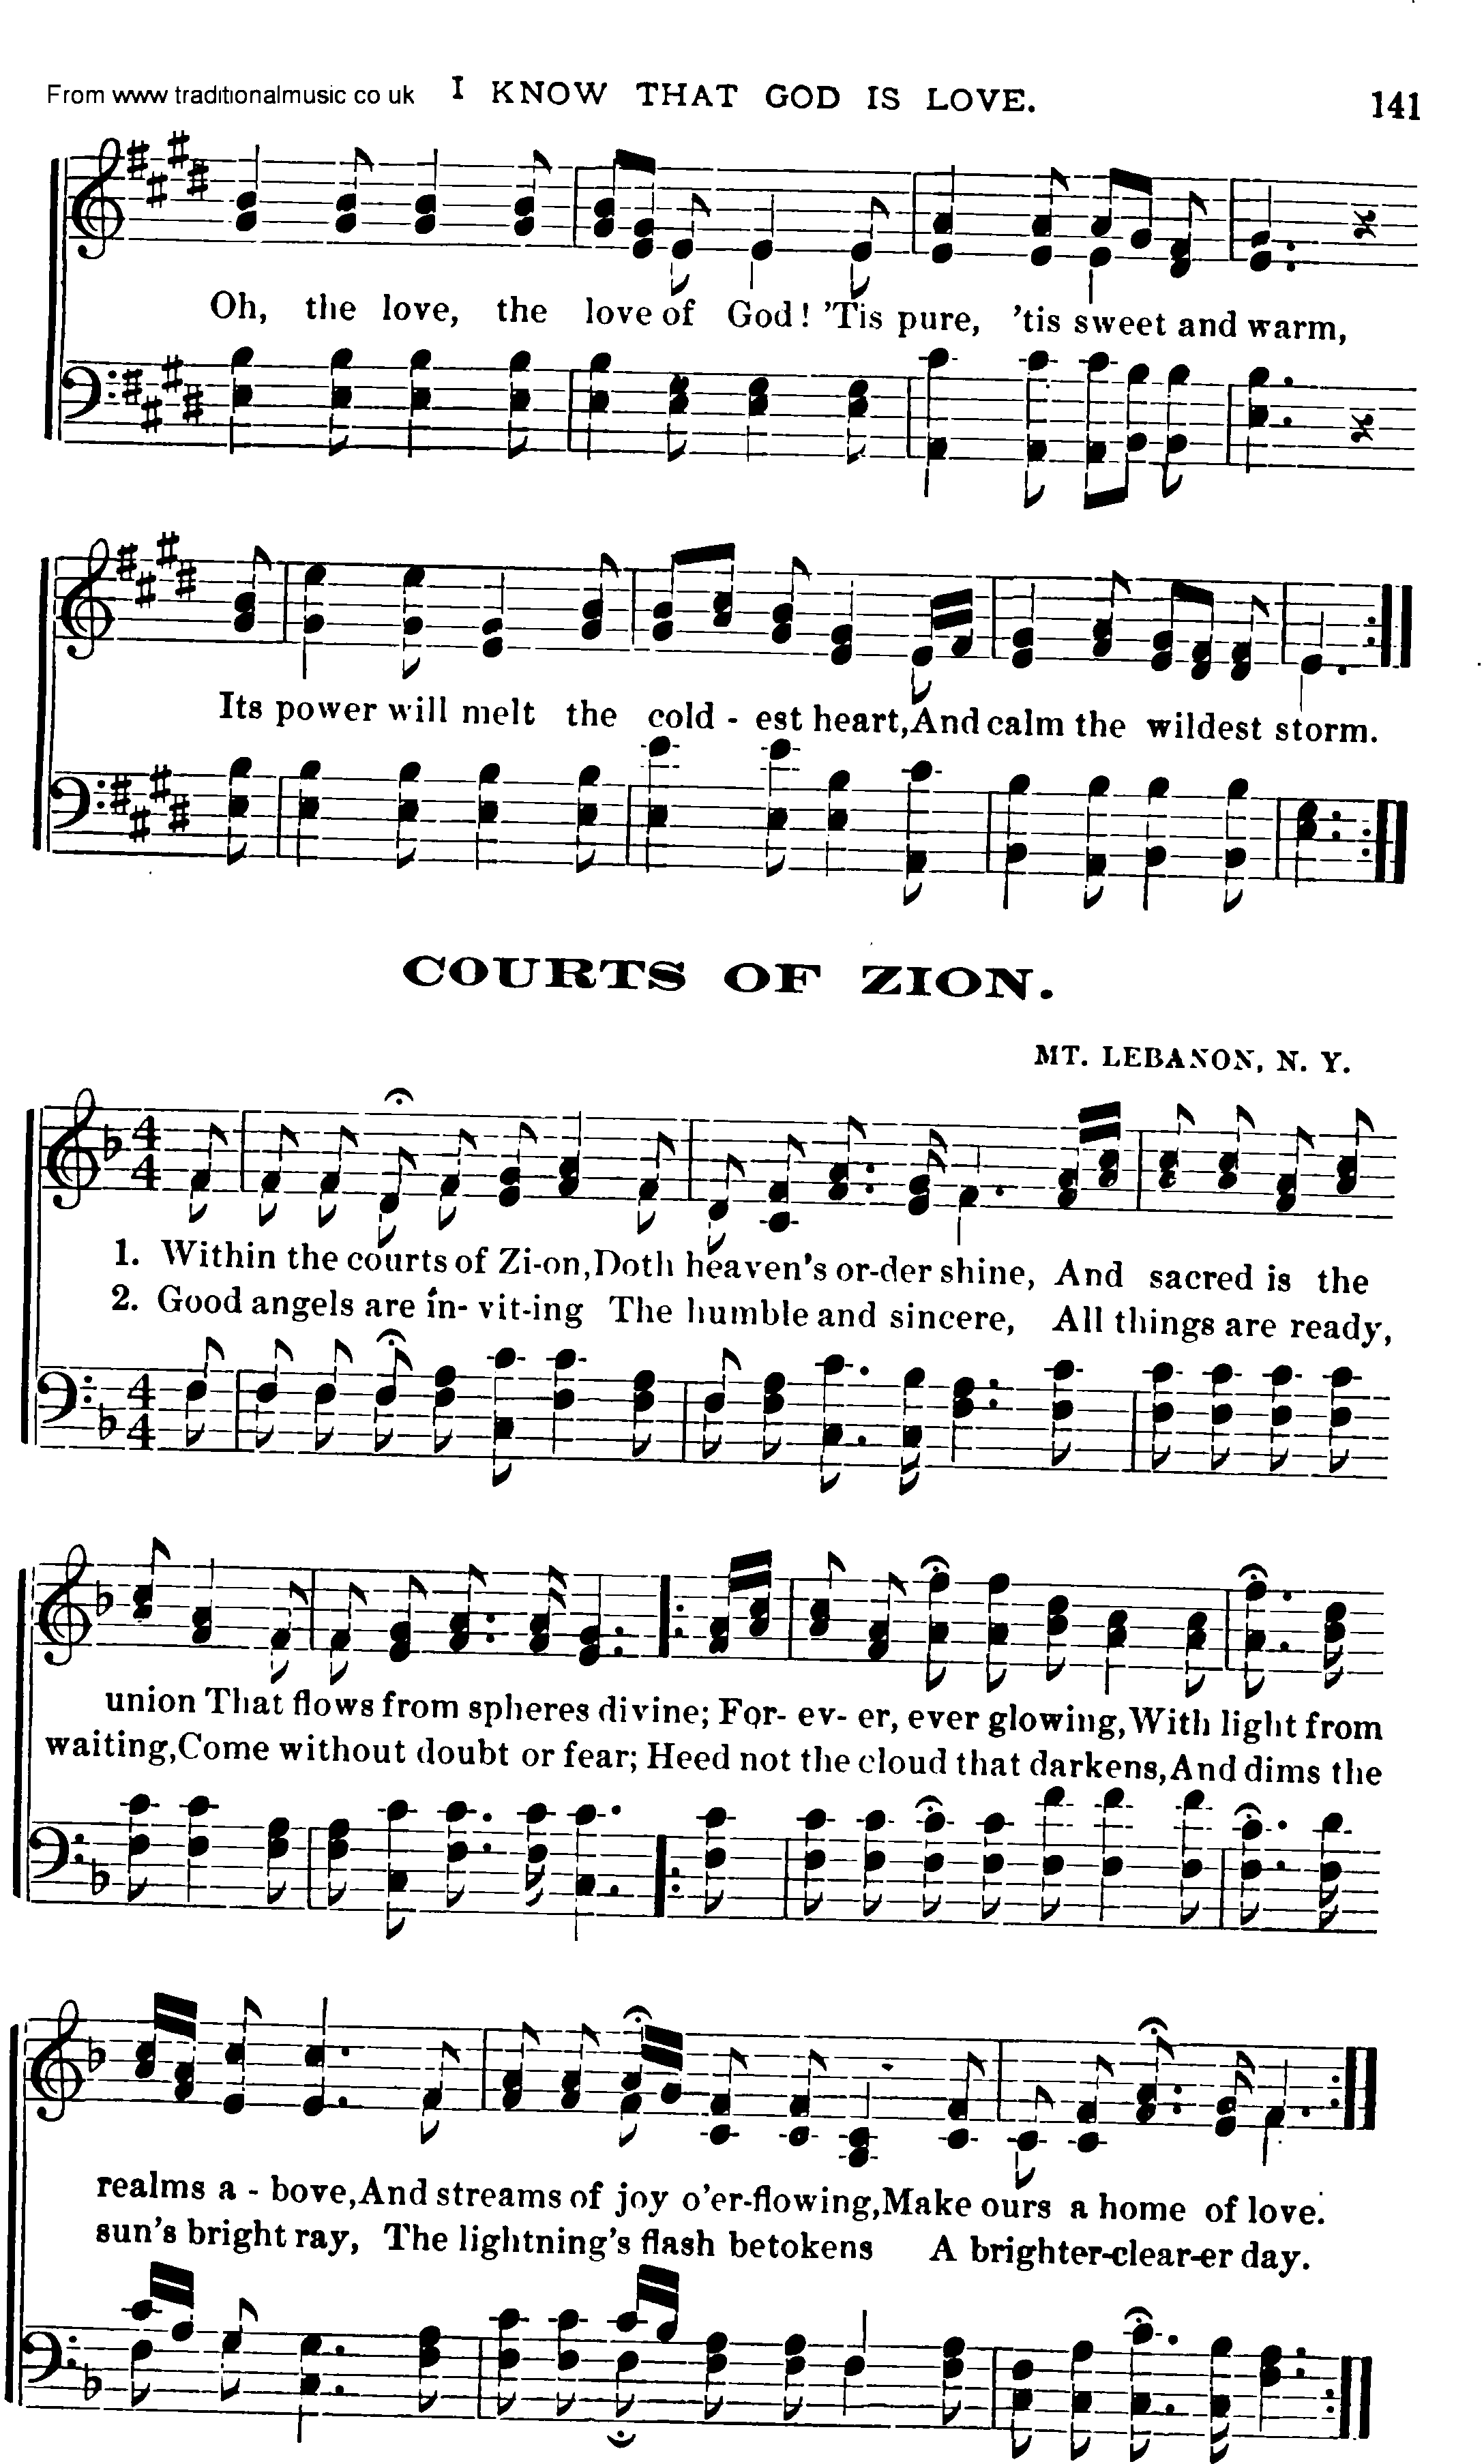 Shaker Music collection, Hymn: Courts Of Zion, sheetmusic and PDF